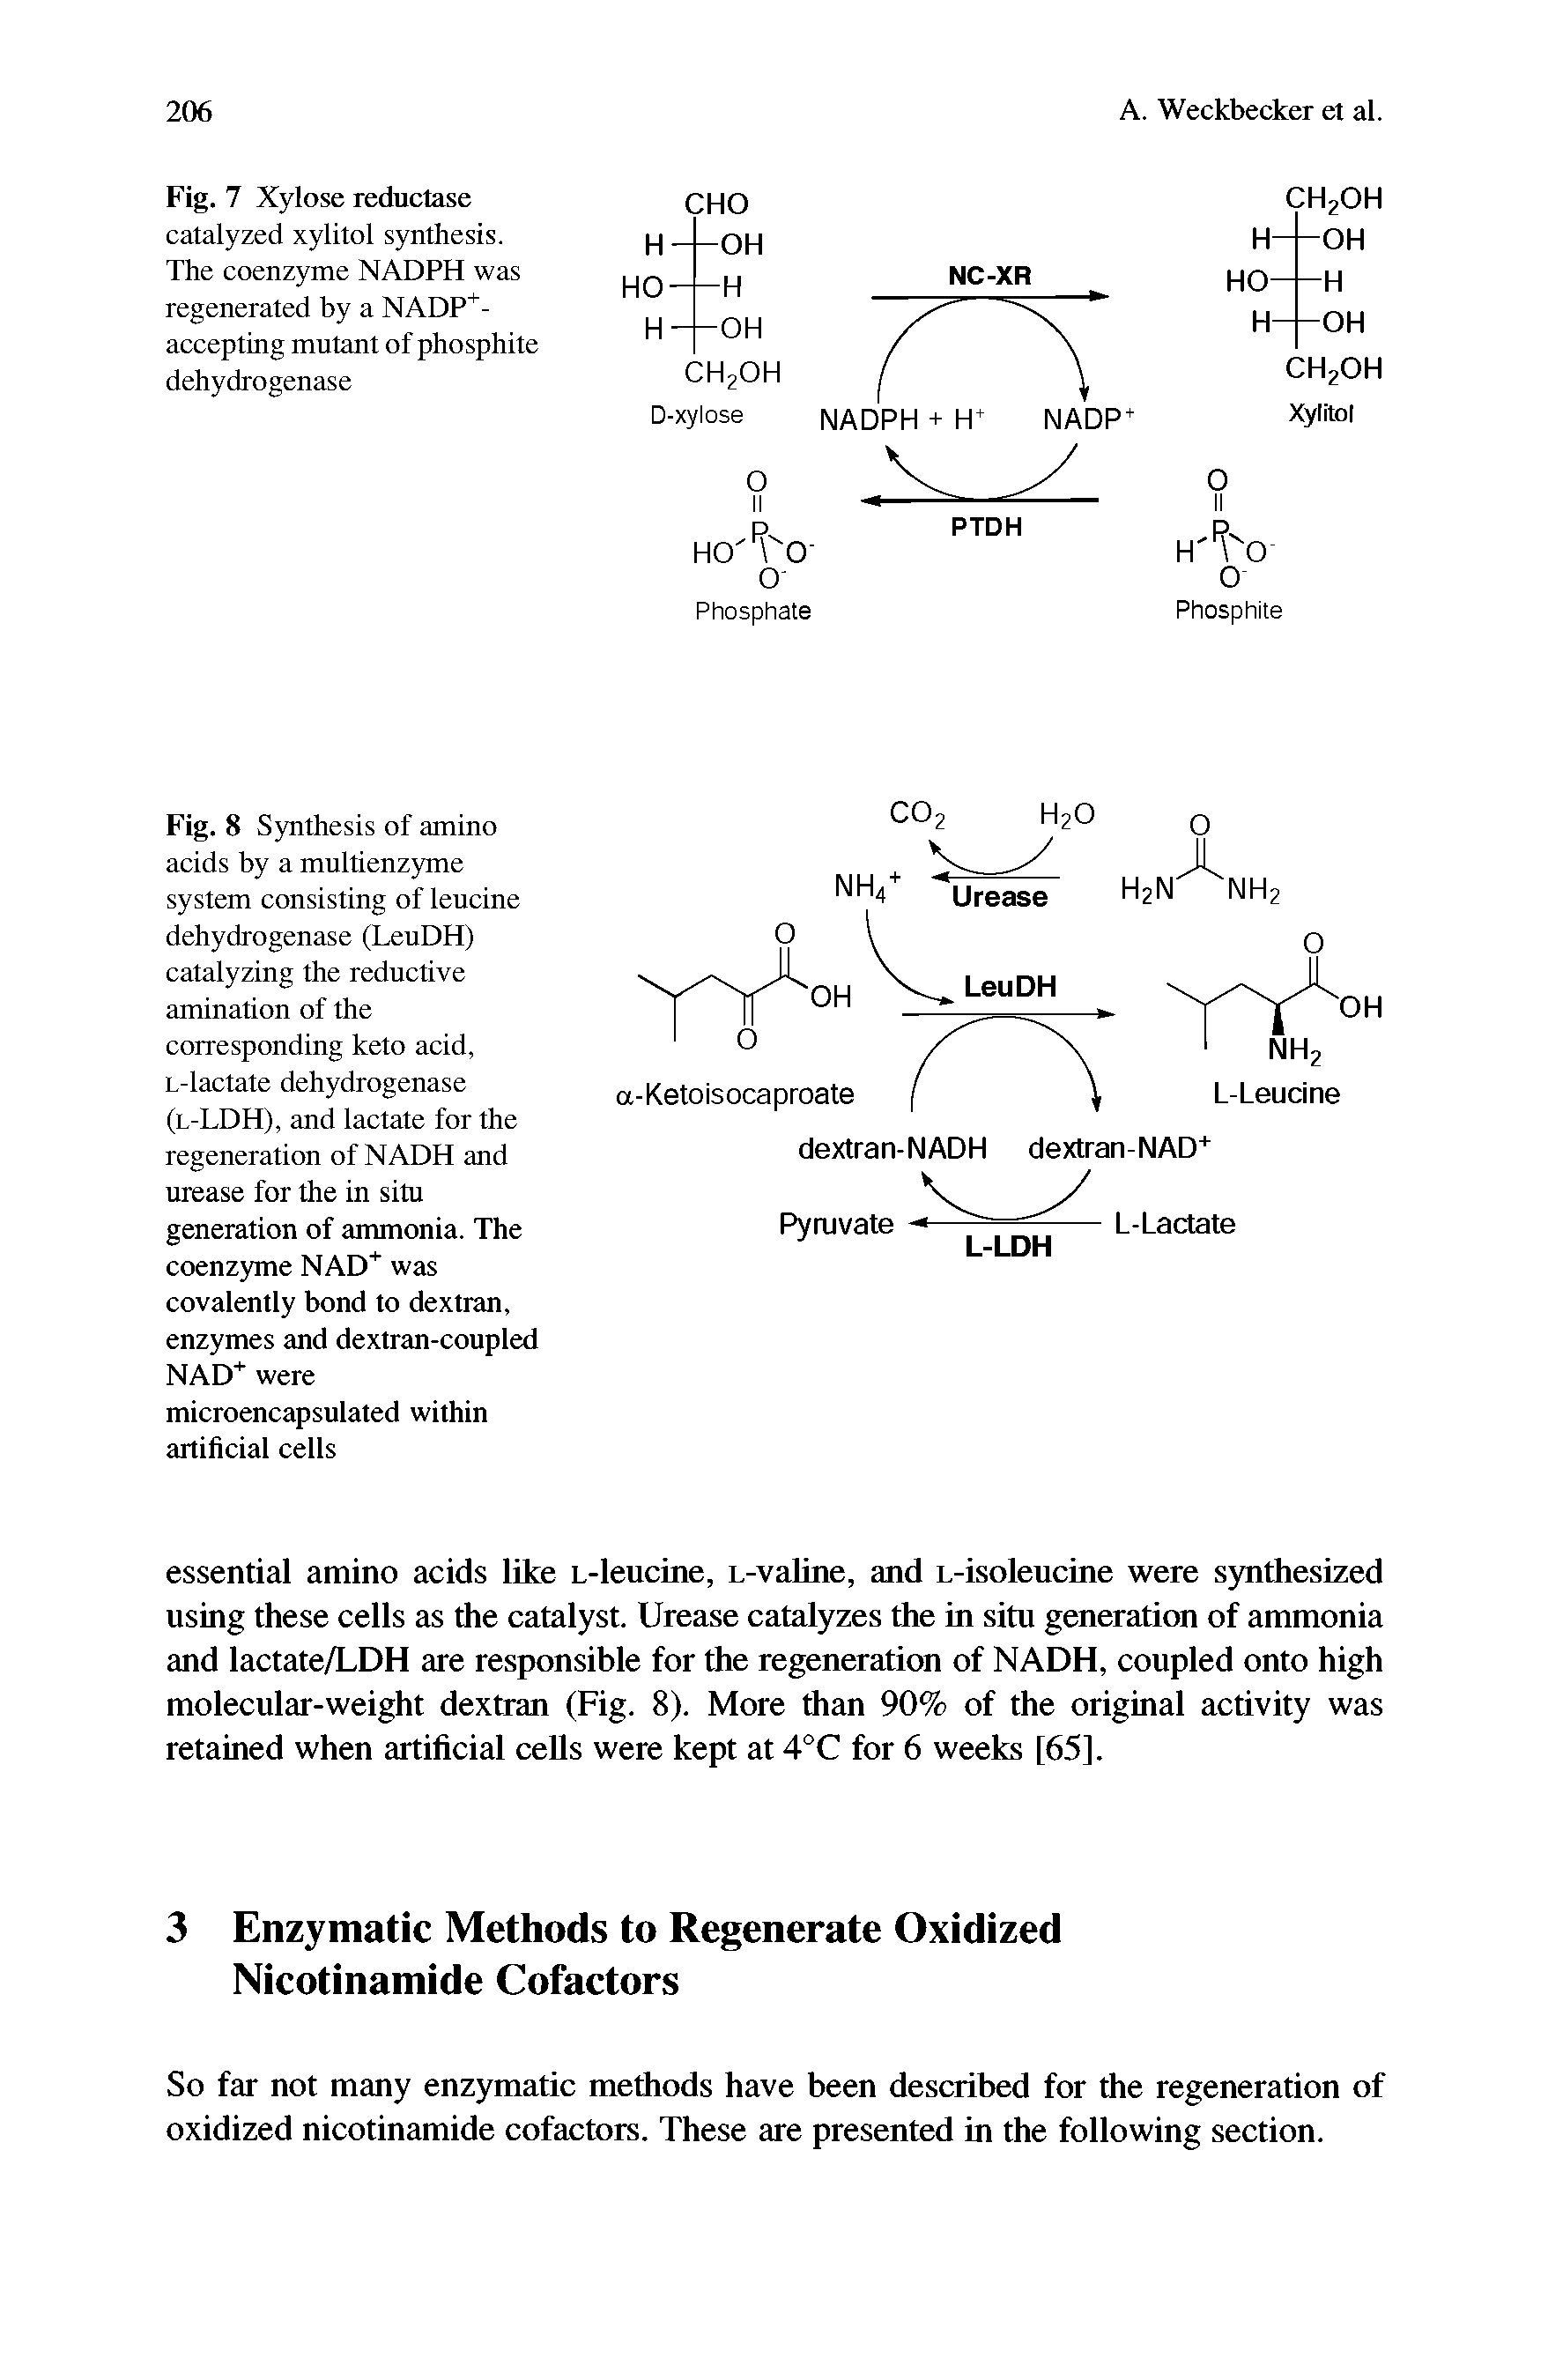 Fig. 7 Xylose reductase catalyzed xylitol synthesis. The coenzyme NADPH was regenerated by a NADP+-accepting mutant of phosphite dehydrogenase...